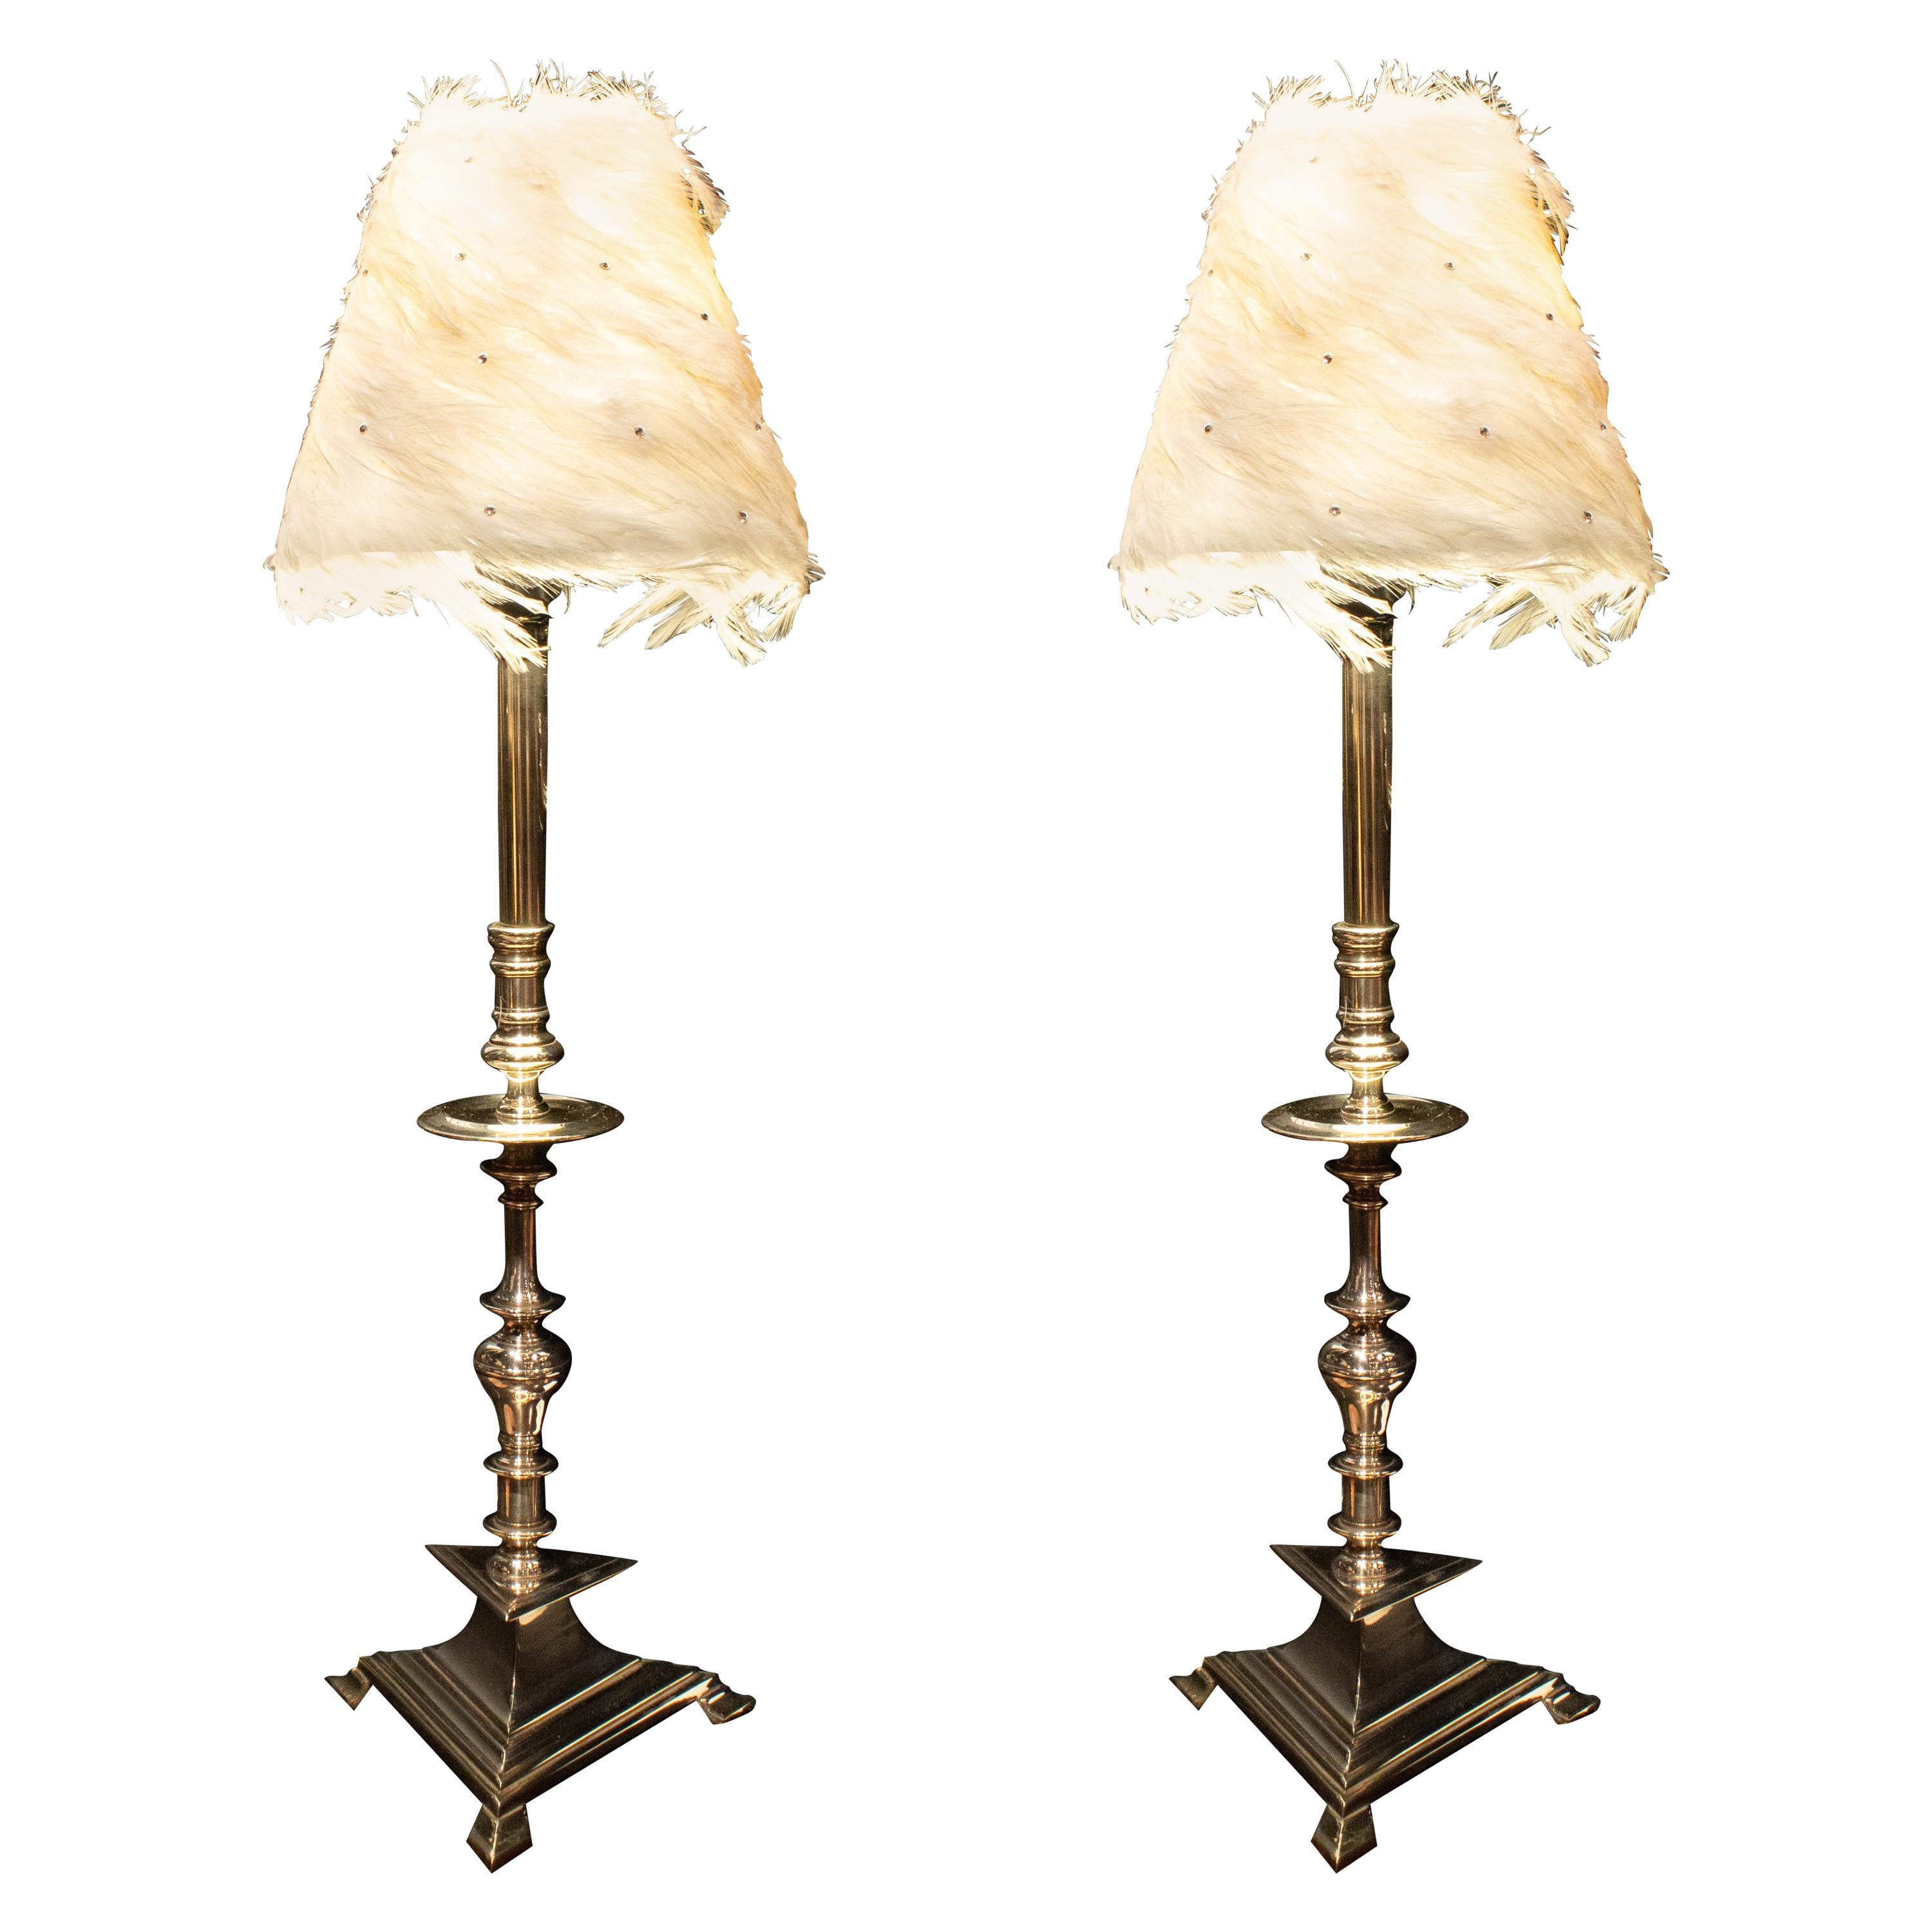 Pair of French 1930s Art Deco Nickel-Plated Table Lamps For Sale